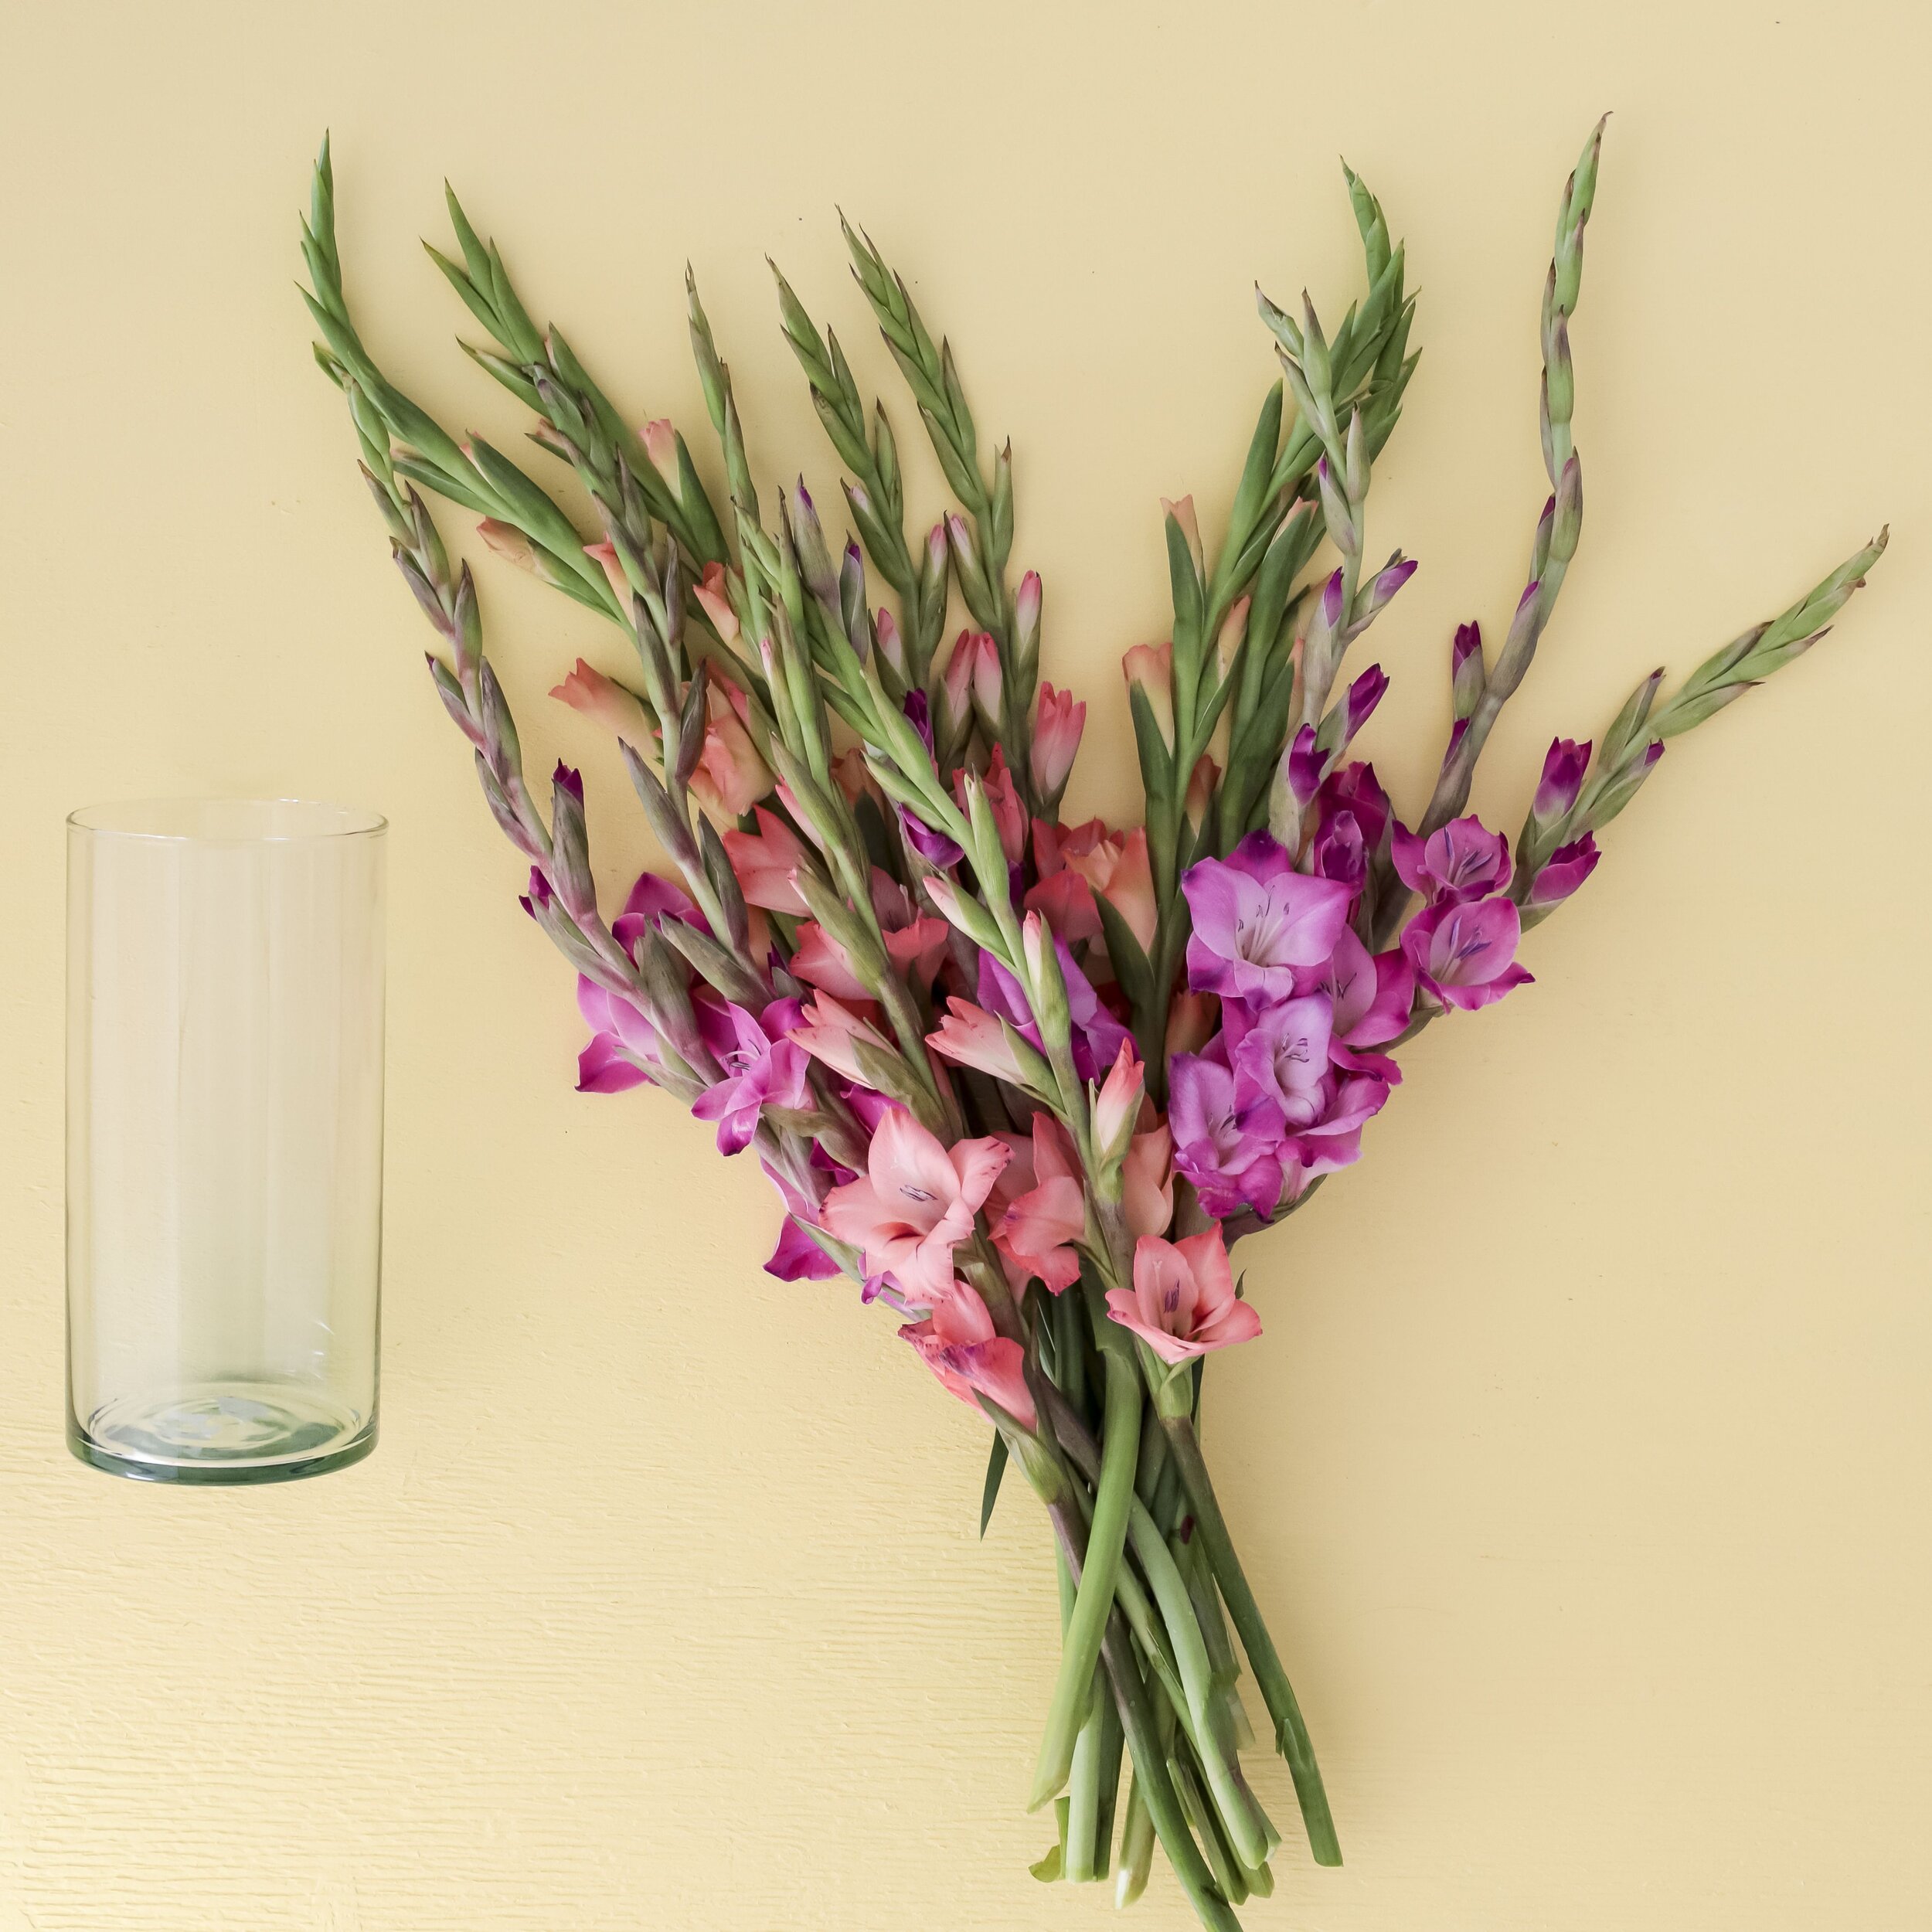 Stems of light and dark pink gladiolus laying on a yellow background with a clear vase beside it